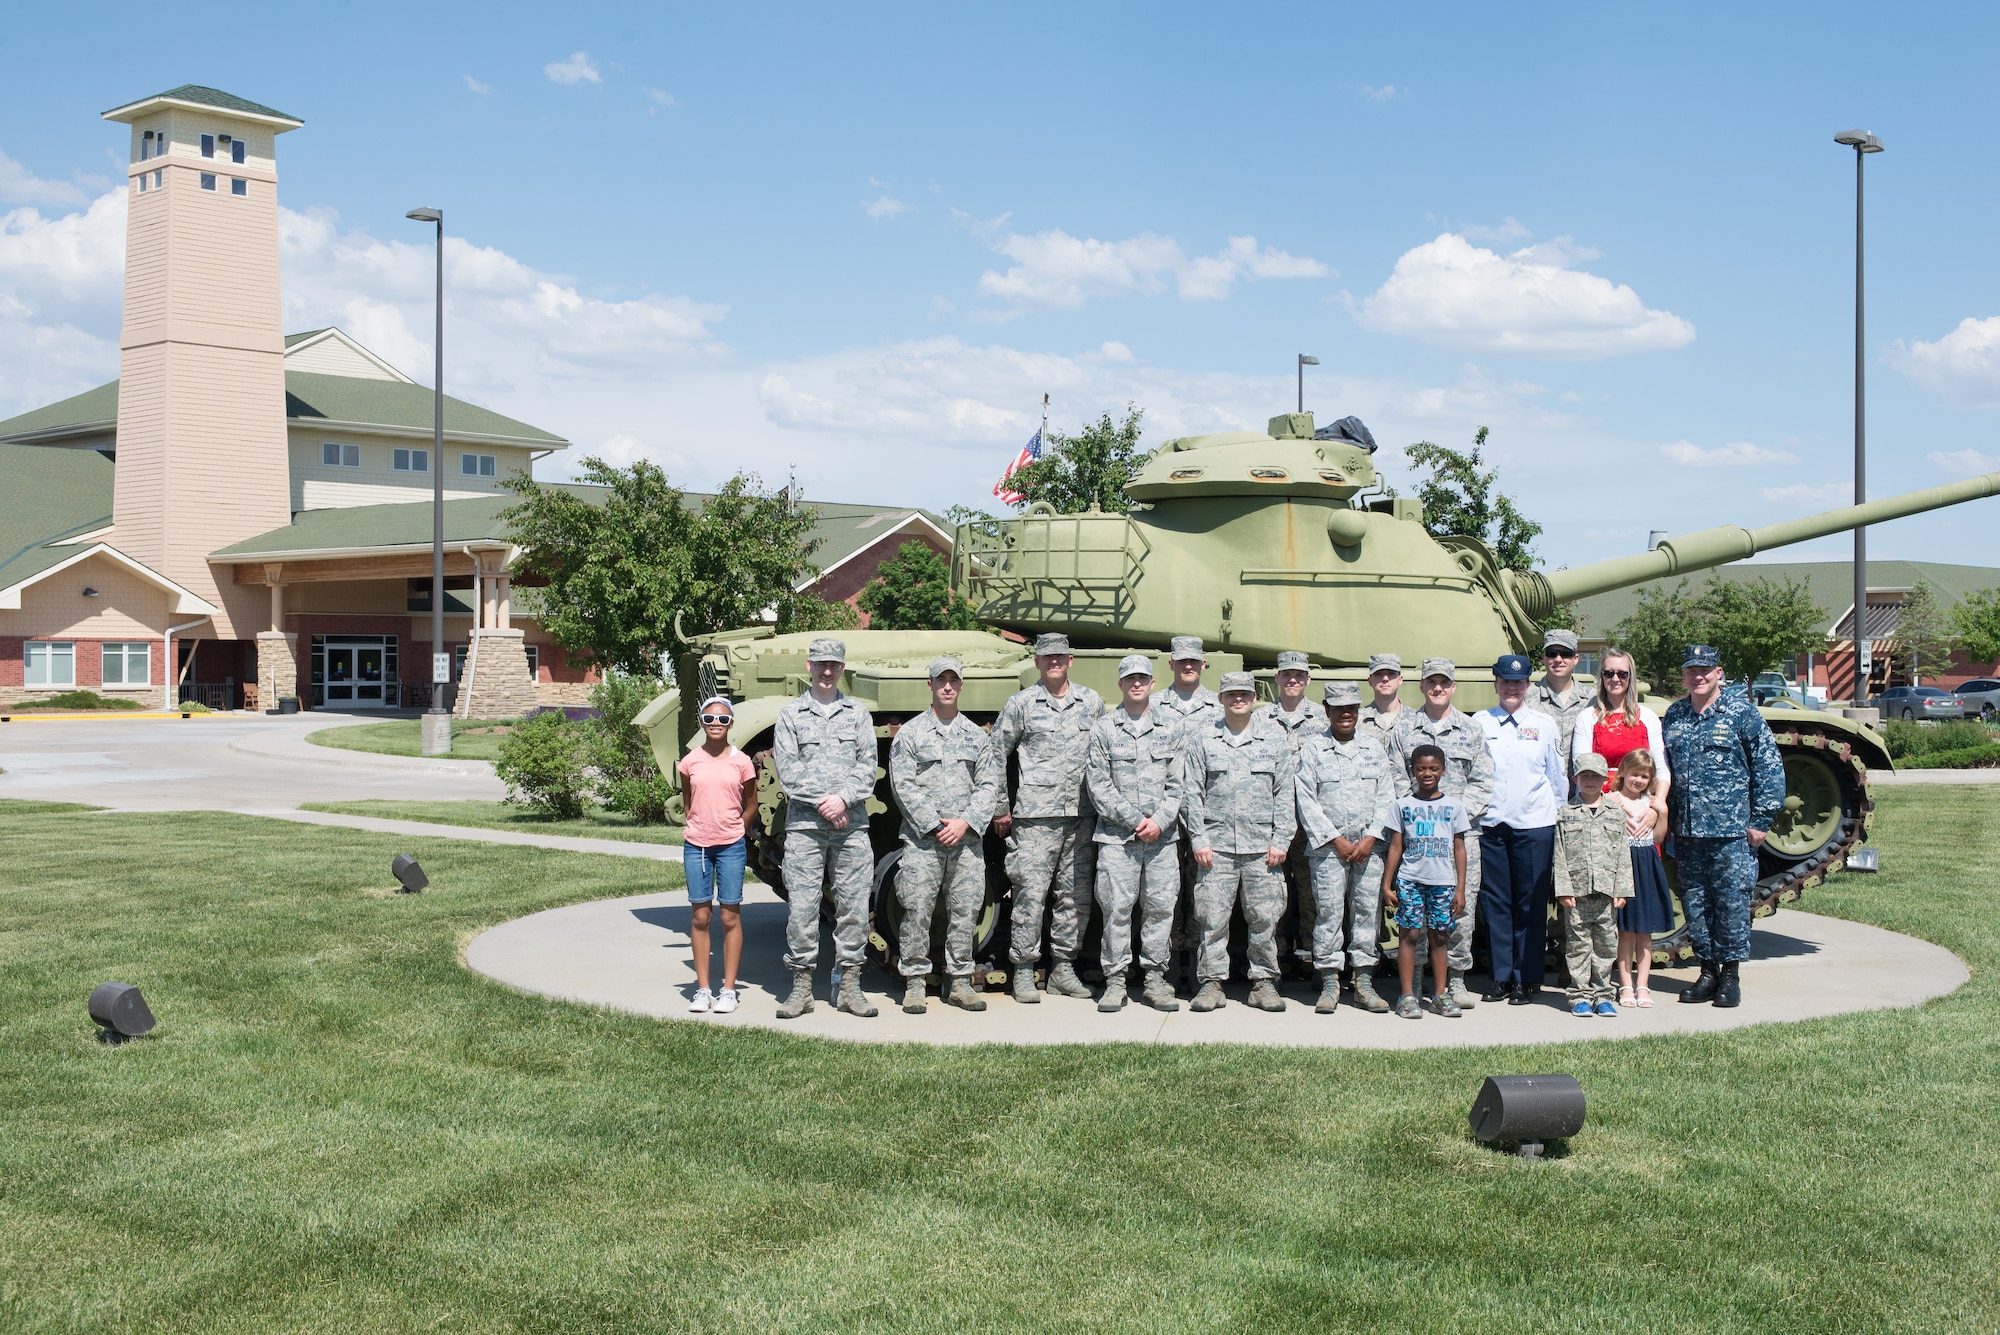 Airmen and family members from the 557th Weather Wing pose for a group photo in front of the Eastern Nebraska Veterans’ Home May 28, 2018, Bellevue, Nebraska. The group volunteered to assist the ENVH in hosting their Memorial Day ceremony. (U.S. Air Force photo by Paul Shirk)